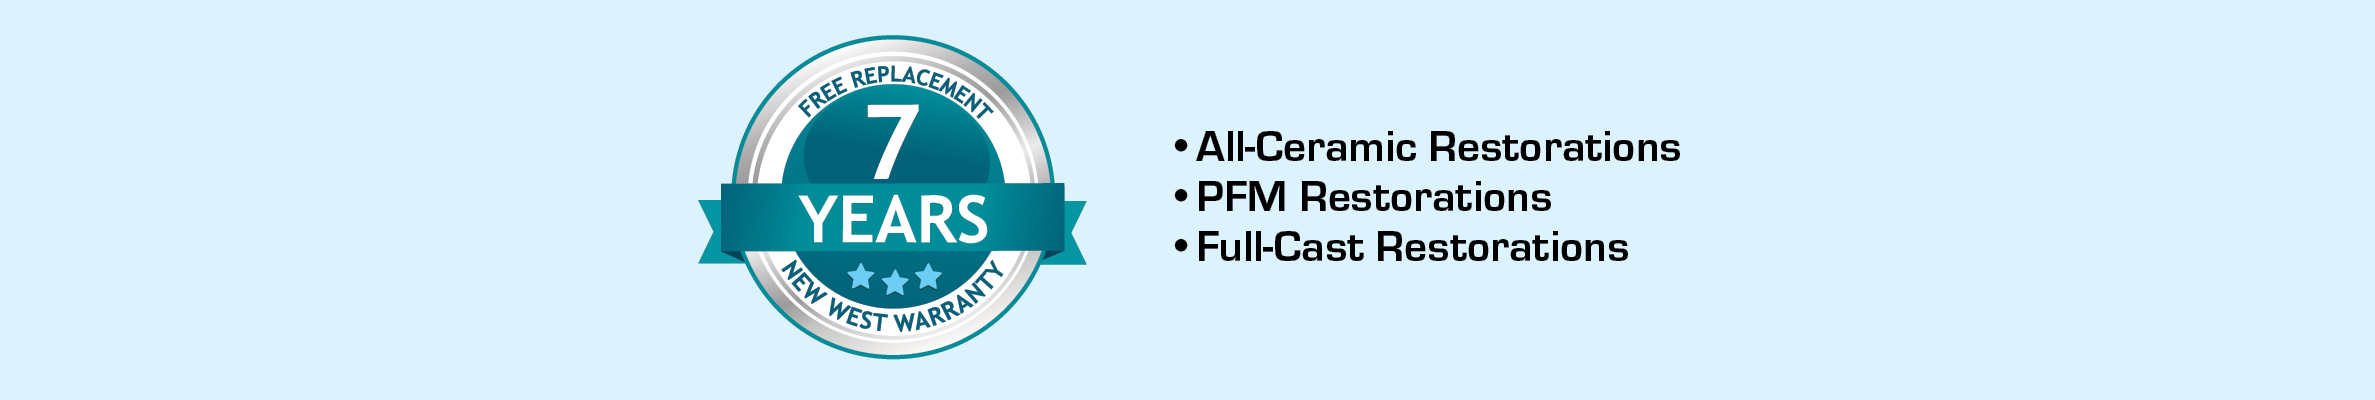 Seven-year warranties come standard with every all-ceramic or PFM (porcelain fused to metal) restoration.